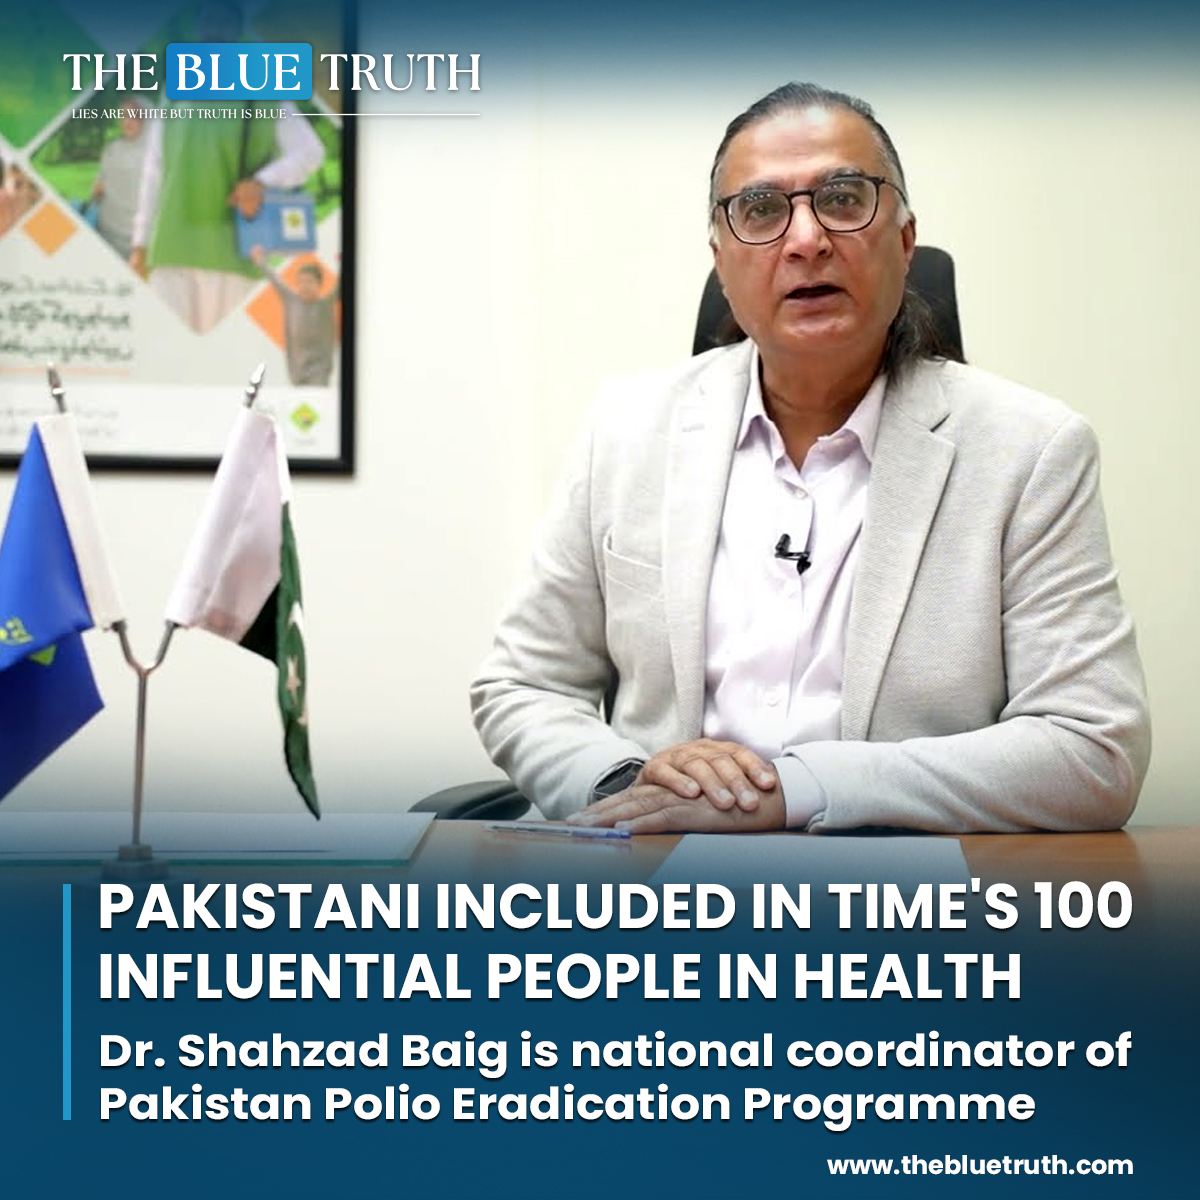 This accolade not only celebrates Dr. Baig's individual achievements but also reflects the collective efforts of the nation in combating polio.
#PakistaniDoctor #Time100Health #HealthInfluencer #PakistaniHealthcare
#GlobalHealthLeadership #HealthcareHero #tbt #TheBlueTruth